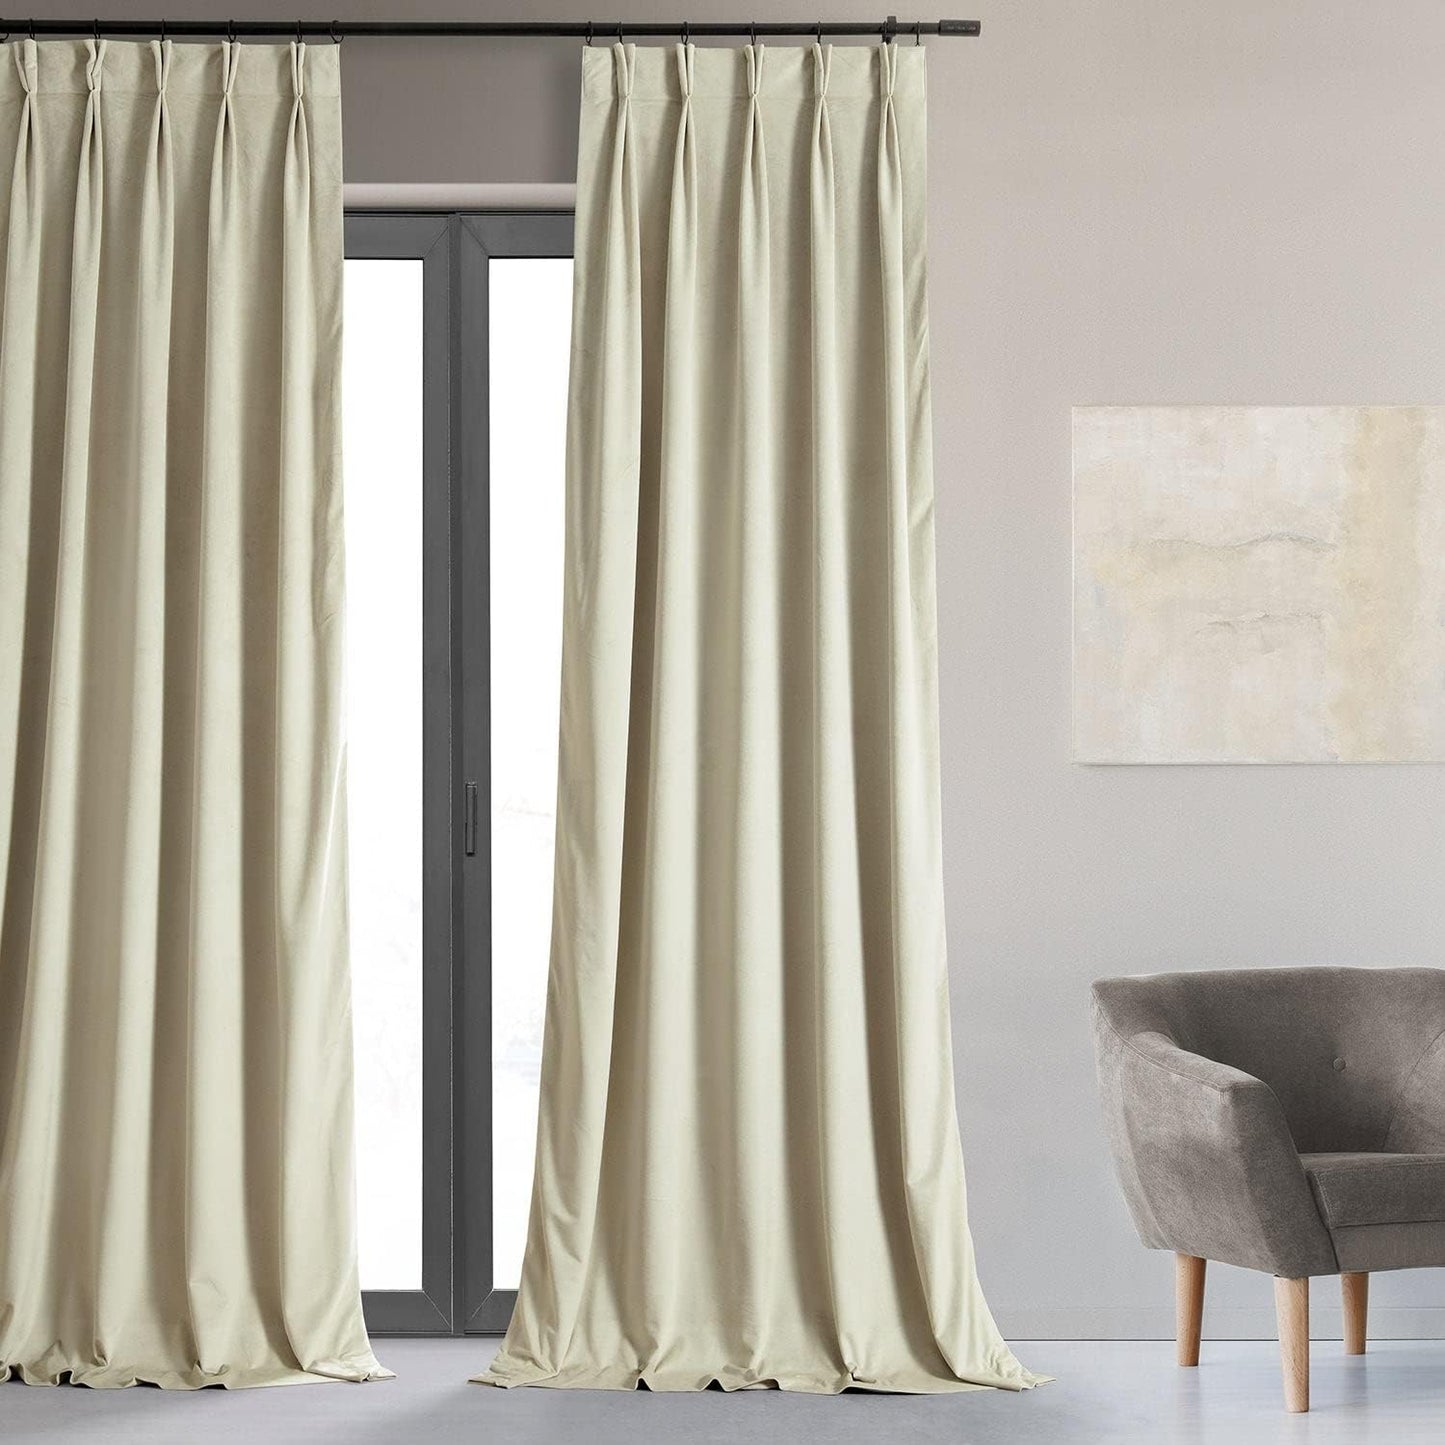 HPD Half Price Drapes Velvet Blackout Curtains/Drapes - 96 Inches Long 1 Panel Blackout Curtain Signature Pleated for Living Room & Bedroom - 25W X 96L, Porcelain White  Exclusive Fabrics & Furnishings   